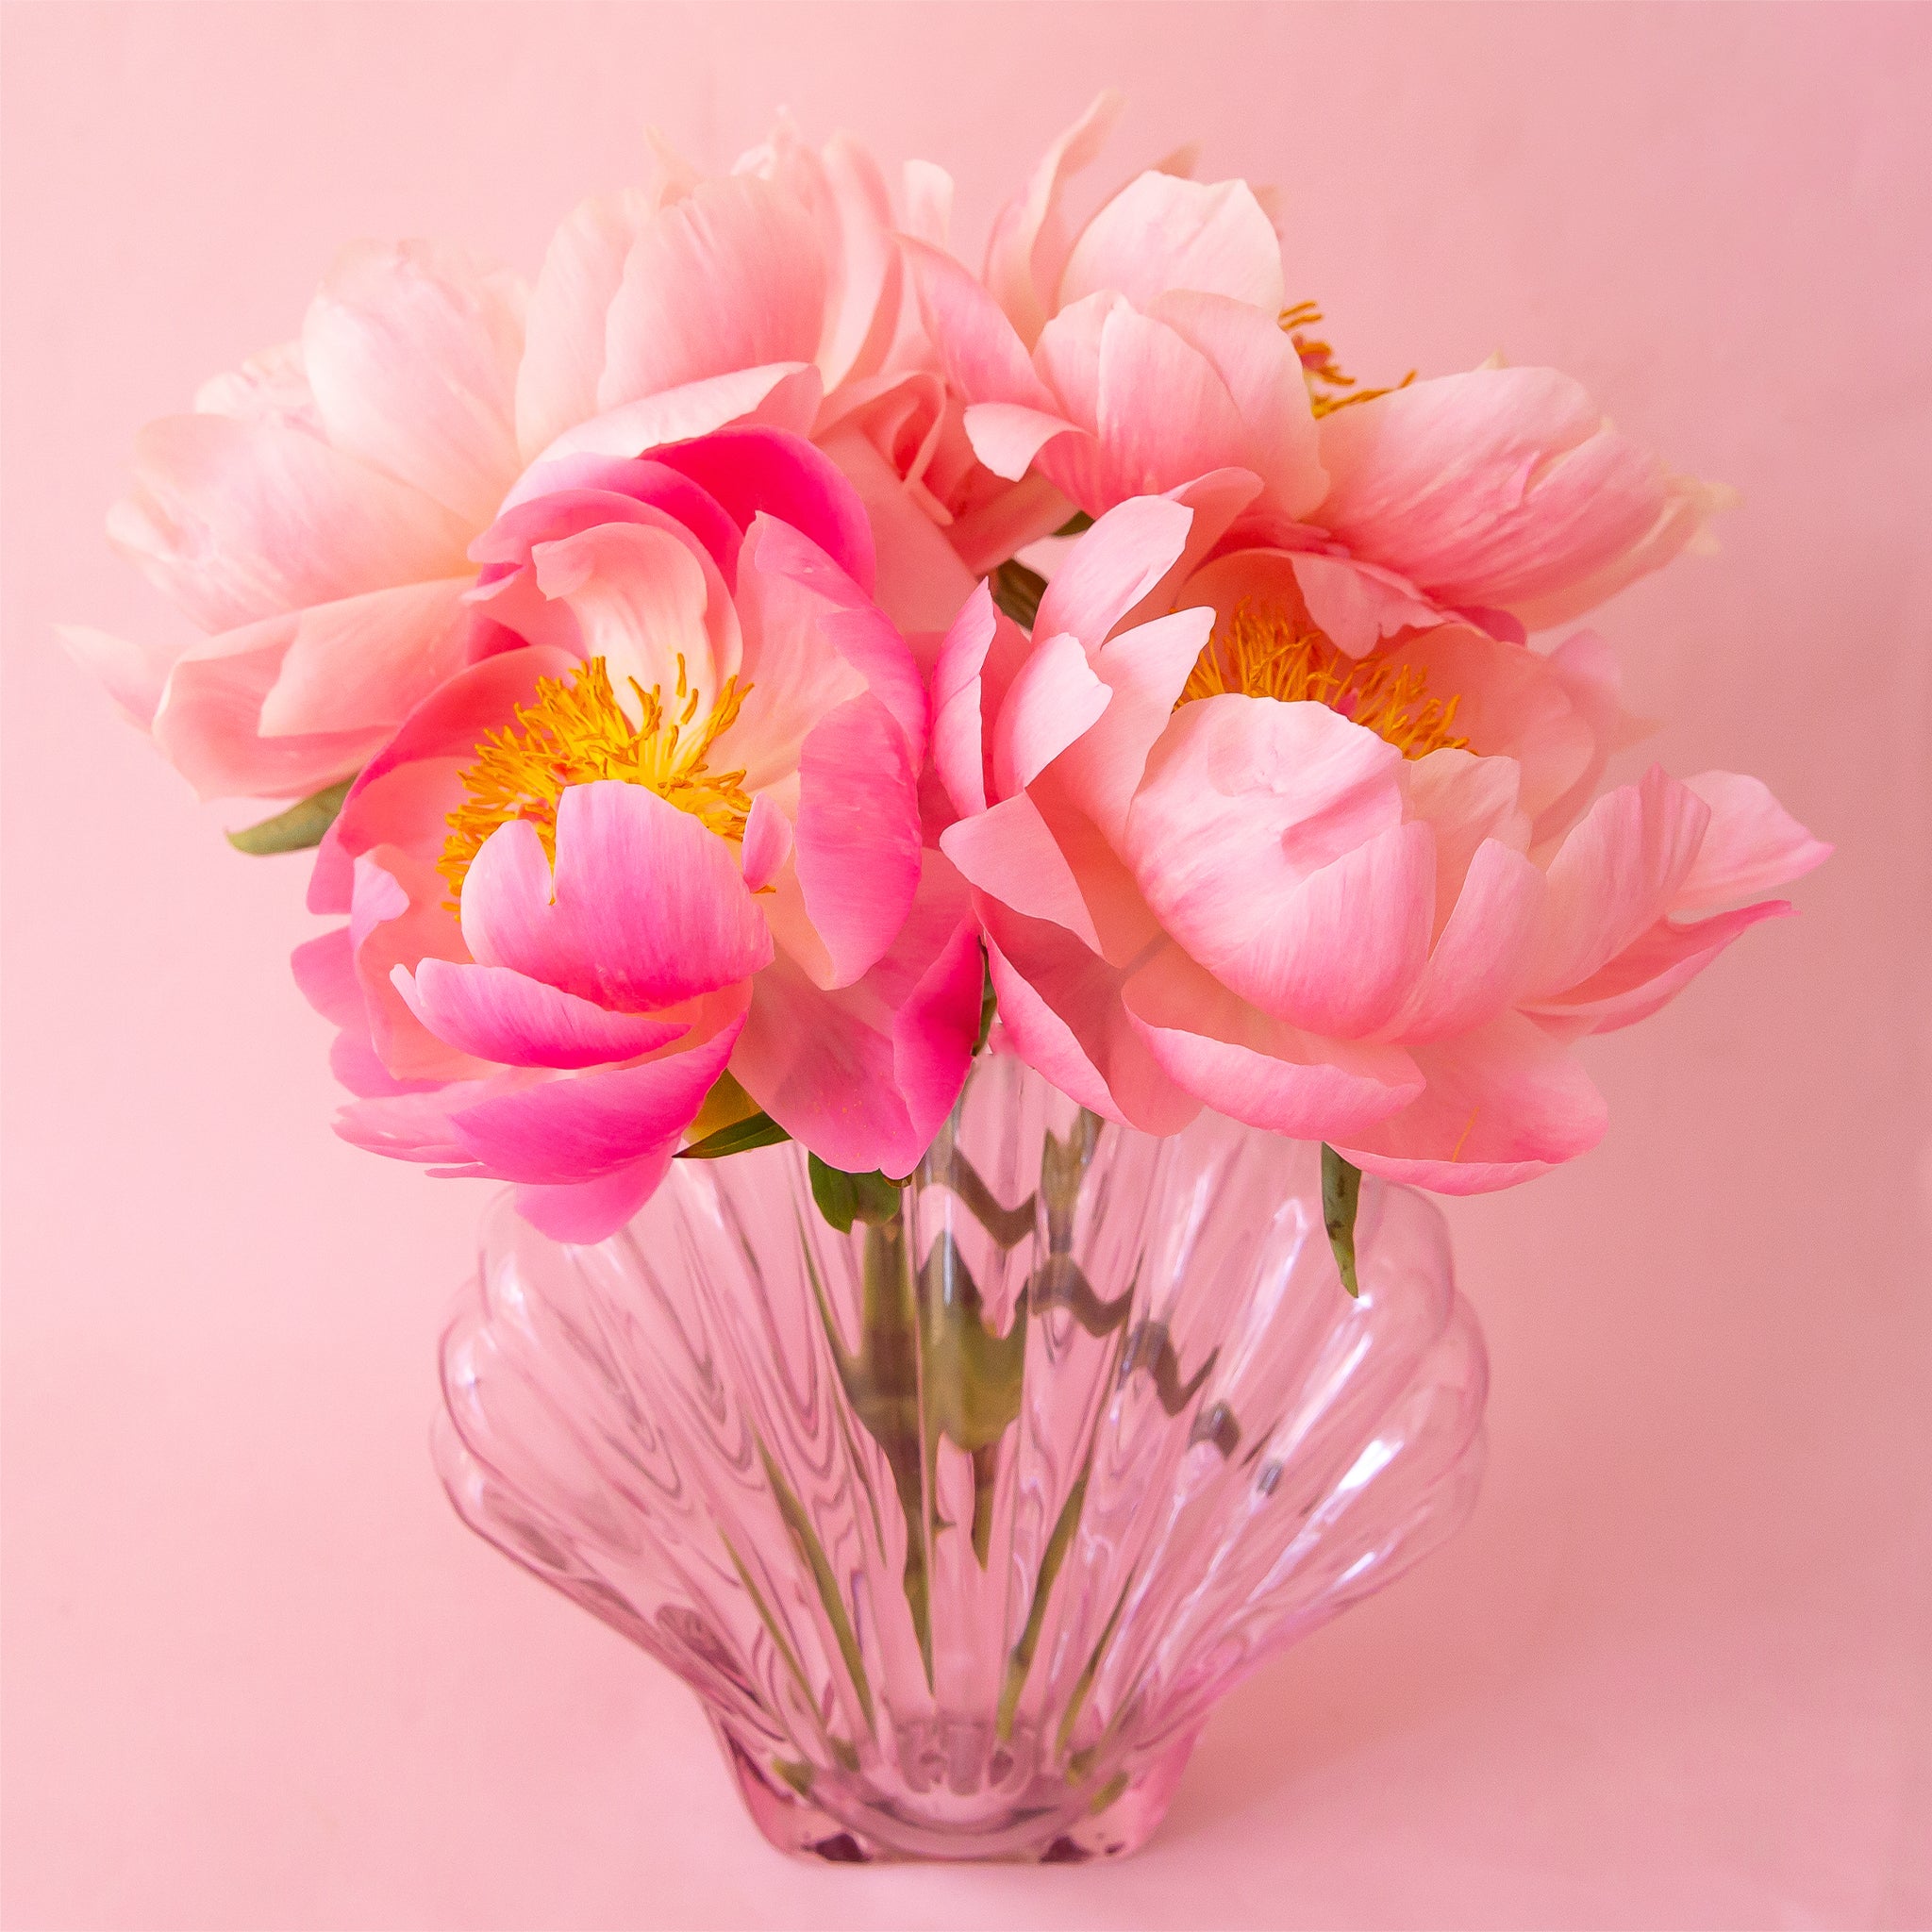 A light pink sea shell shaped vase filled with florals.